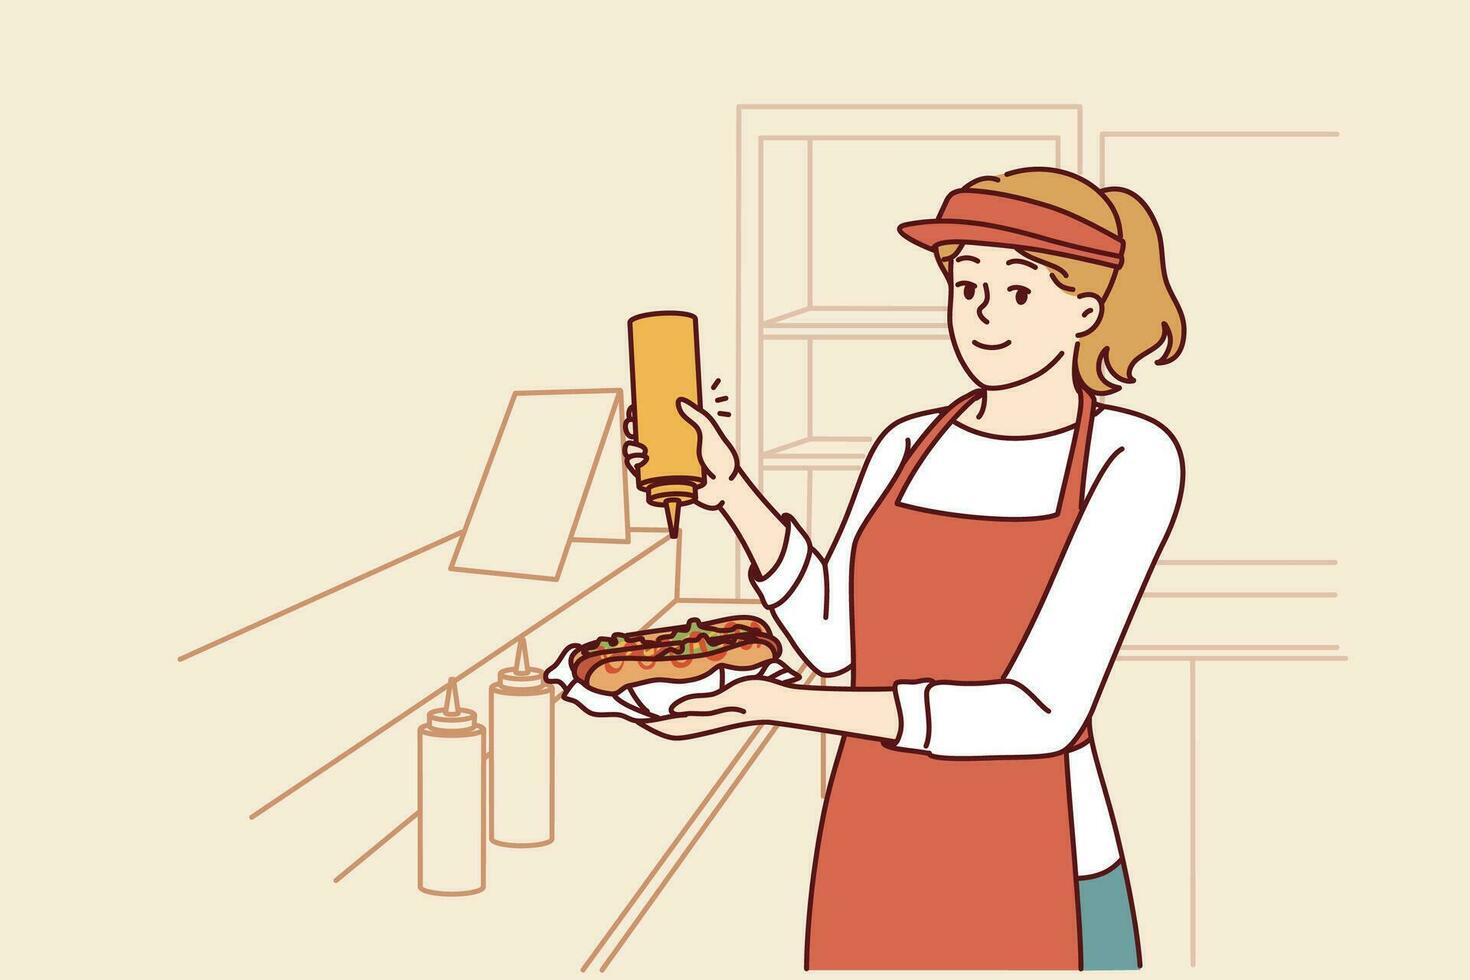 Woman prepares hot dog working as seller in street food cafe or restaurant on wheels with delicious sandwiches on menu. Girl who works in fast food industry adds mustard to hot dog ordered by client. vector